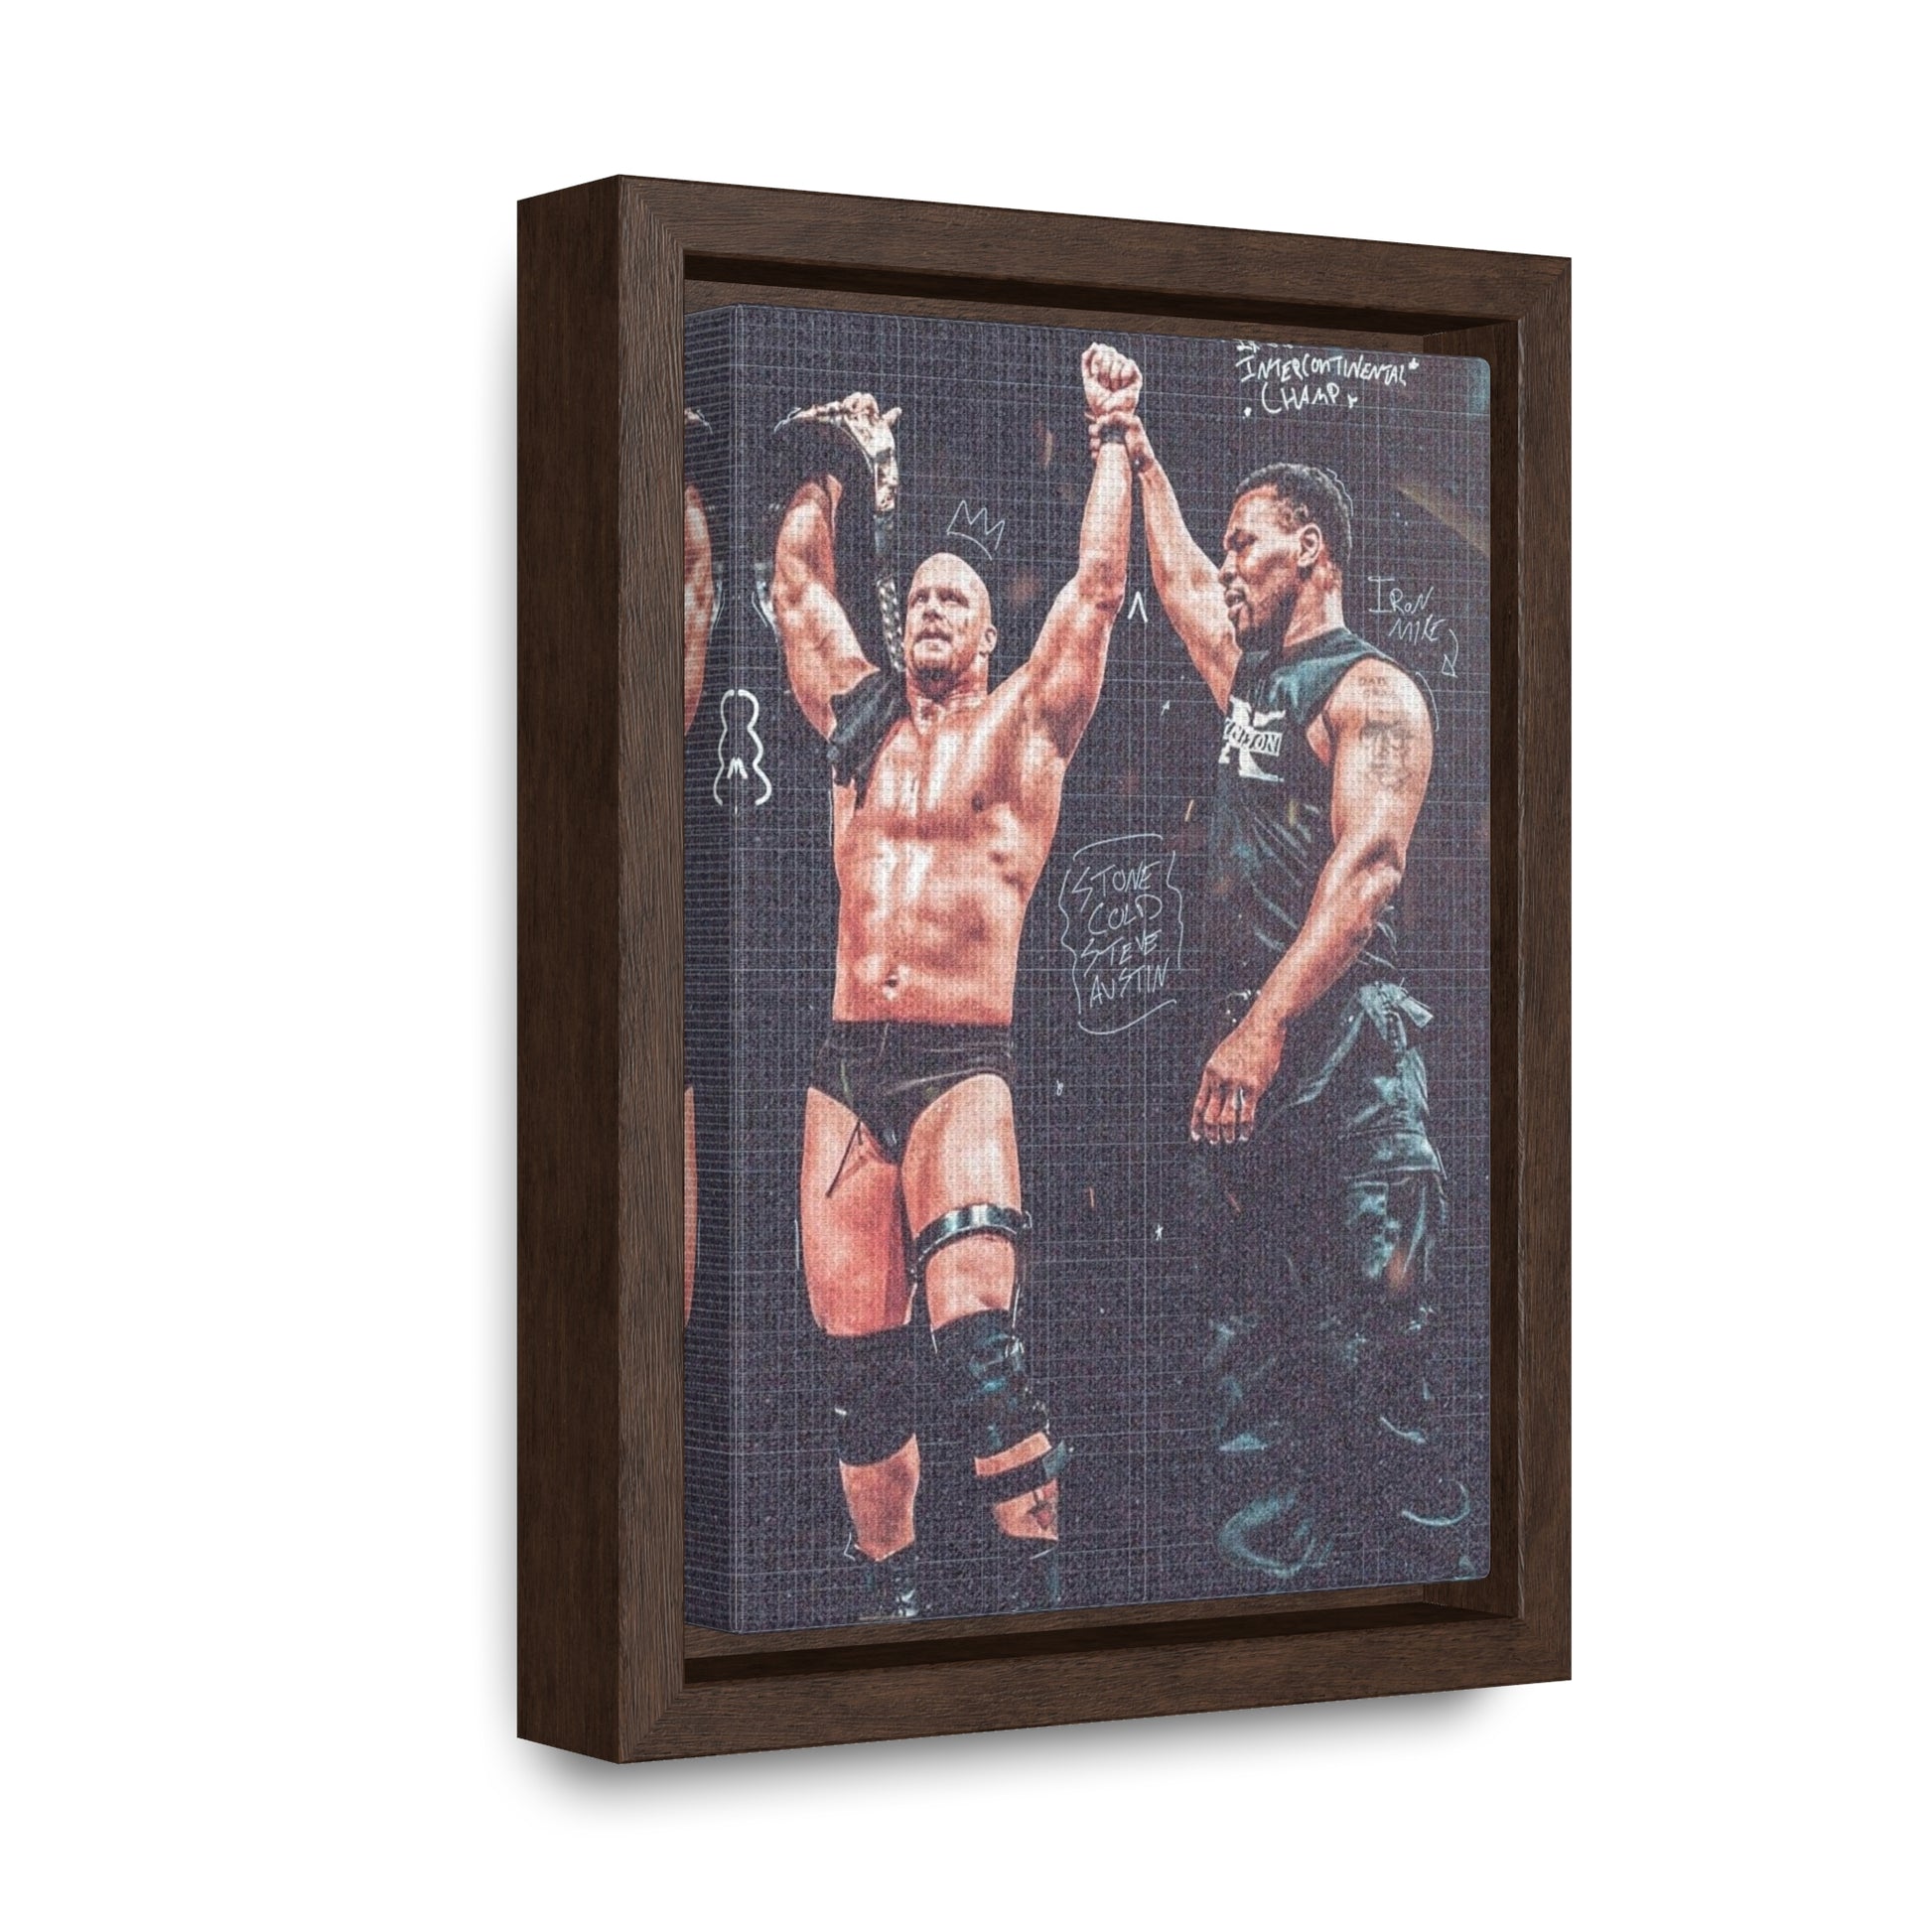 Gallery Canvas Wraps, Vertical Frame Stone cold Mike Tyson